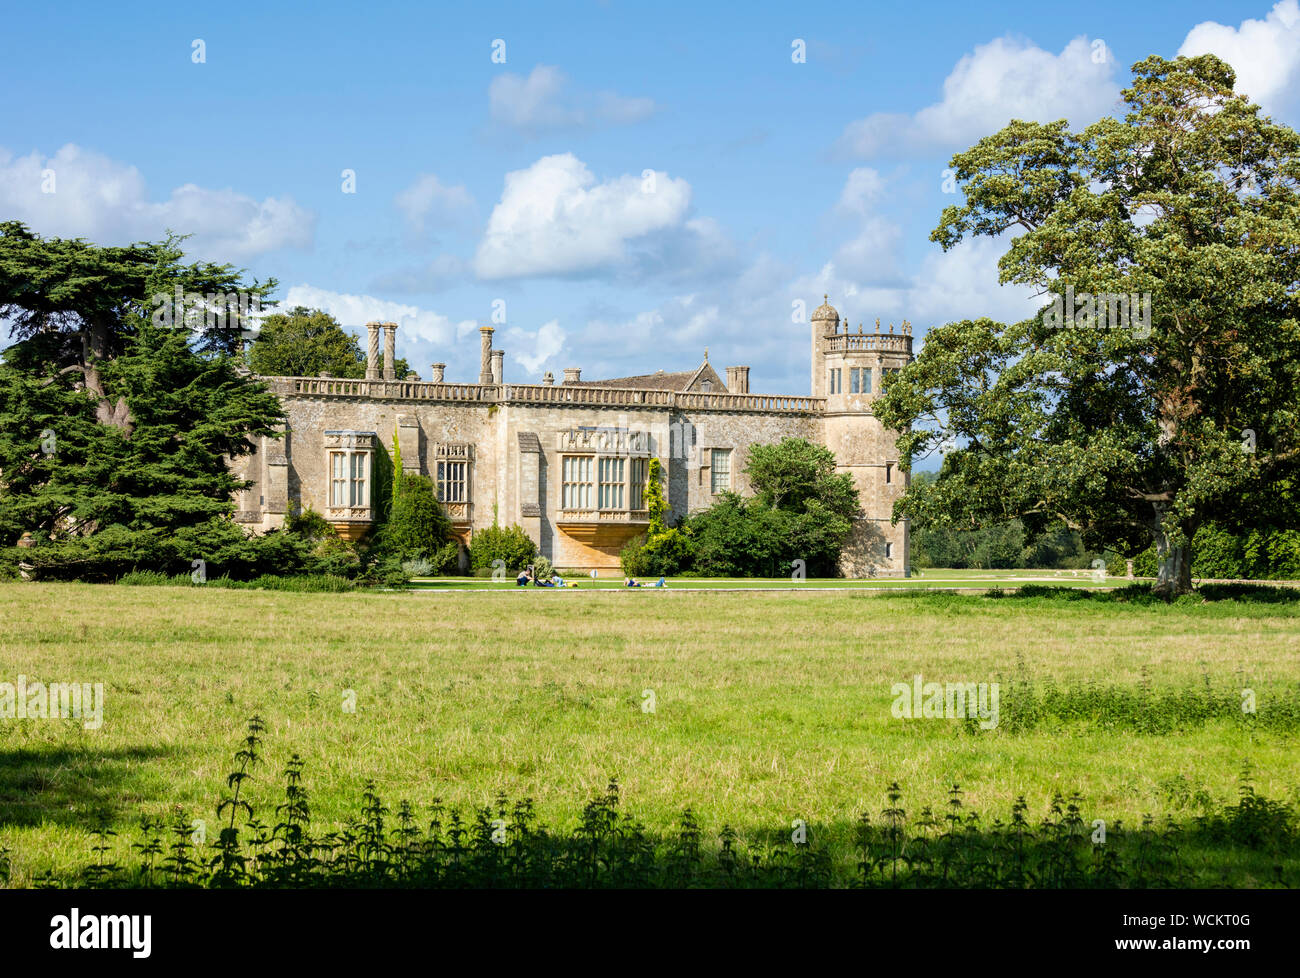 Lacock abbey in grounds William Henry Fox Talbot's country house Lacock village Wiltshire england uk gb Europe Stock Photo